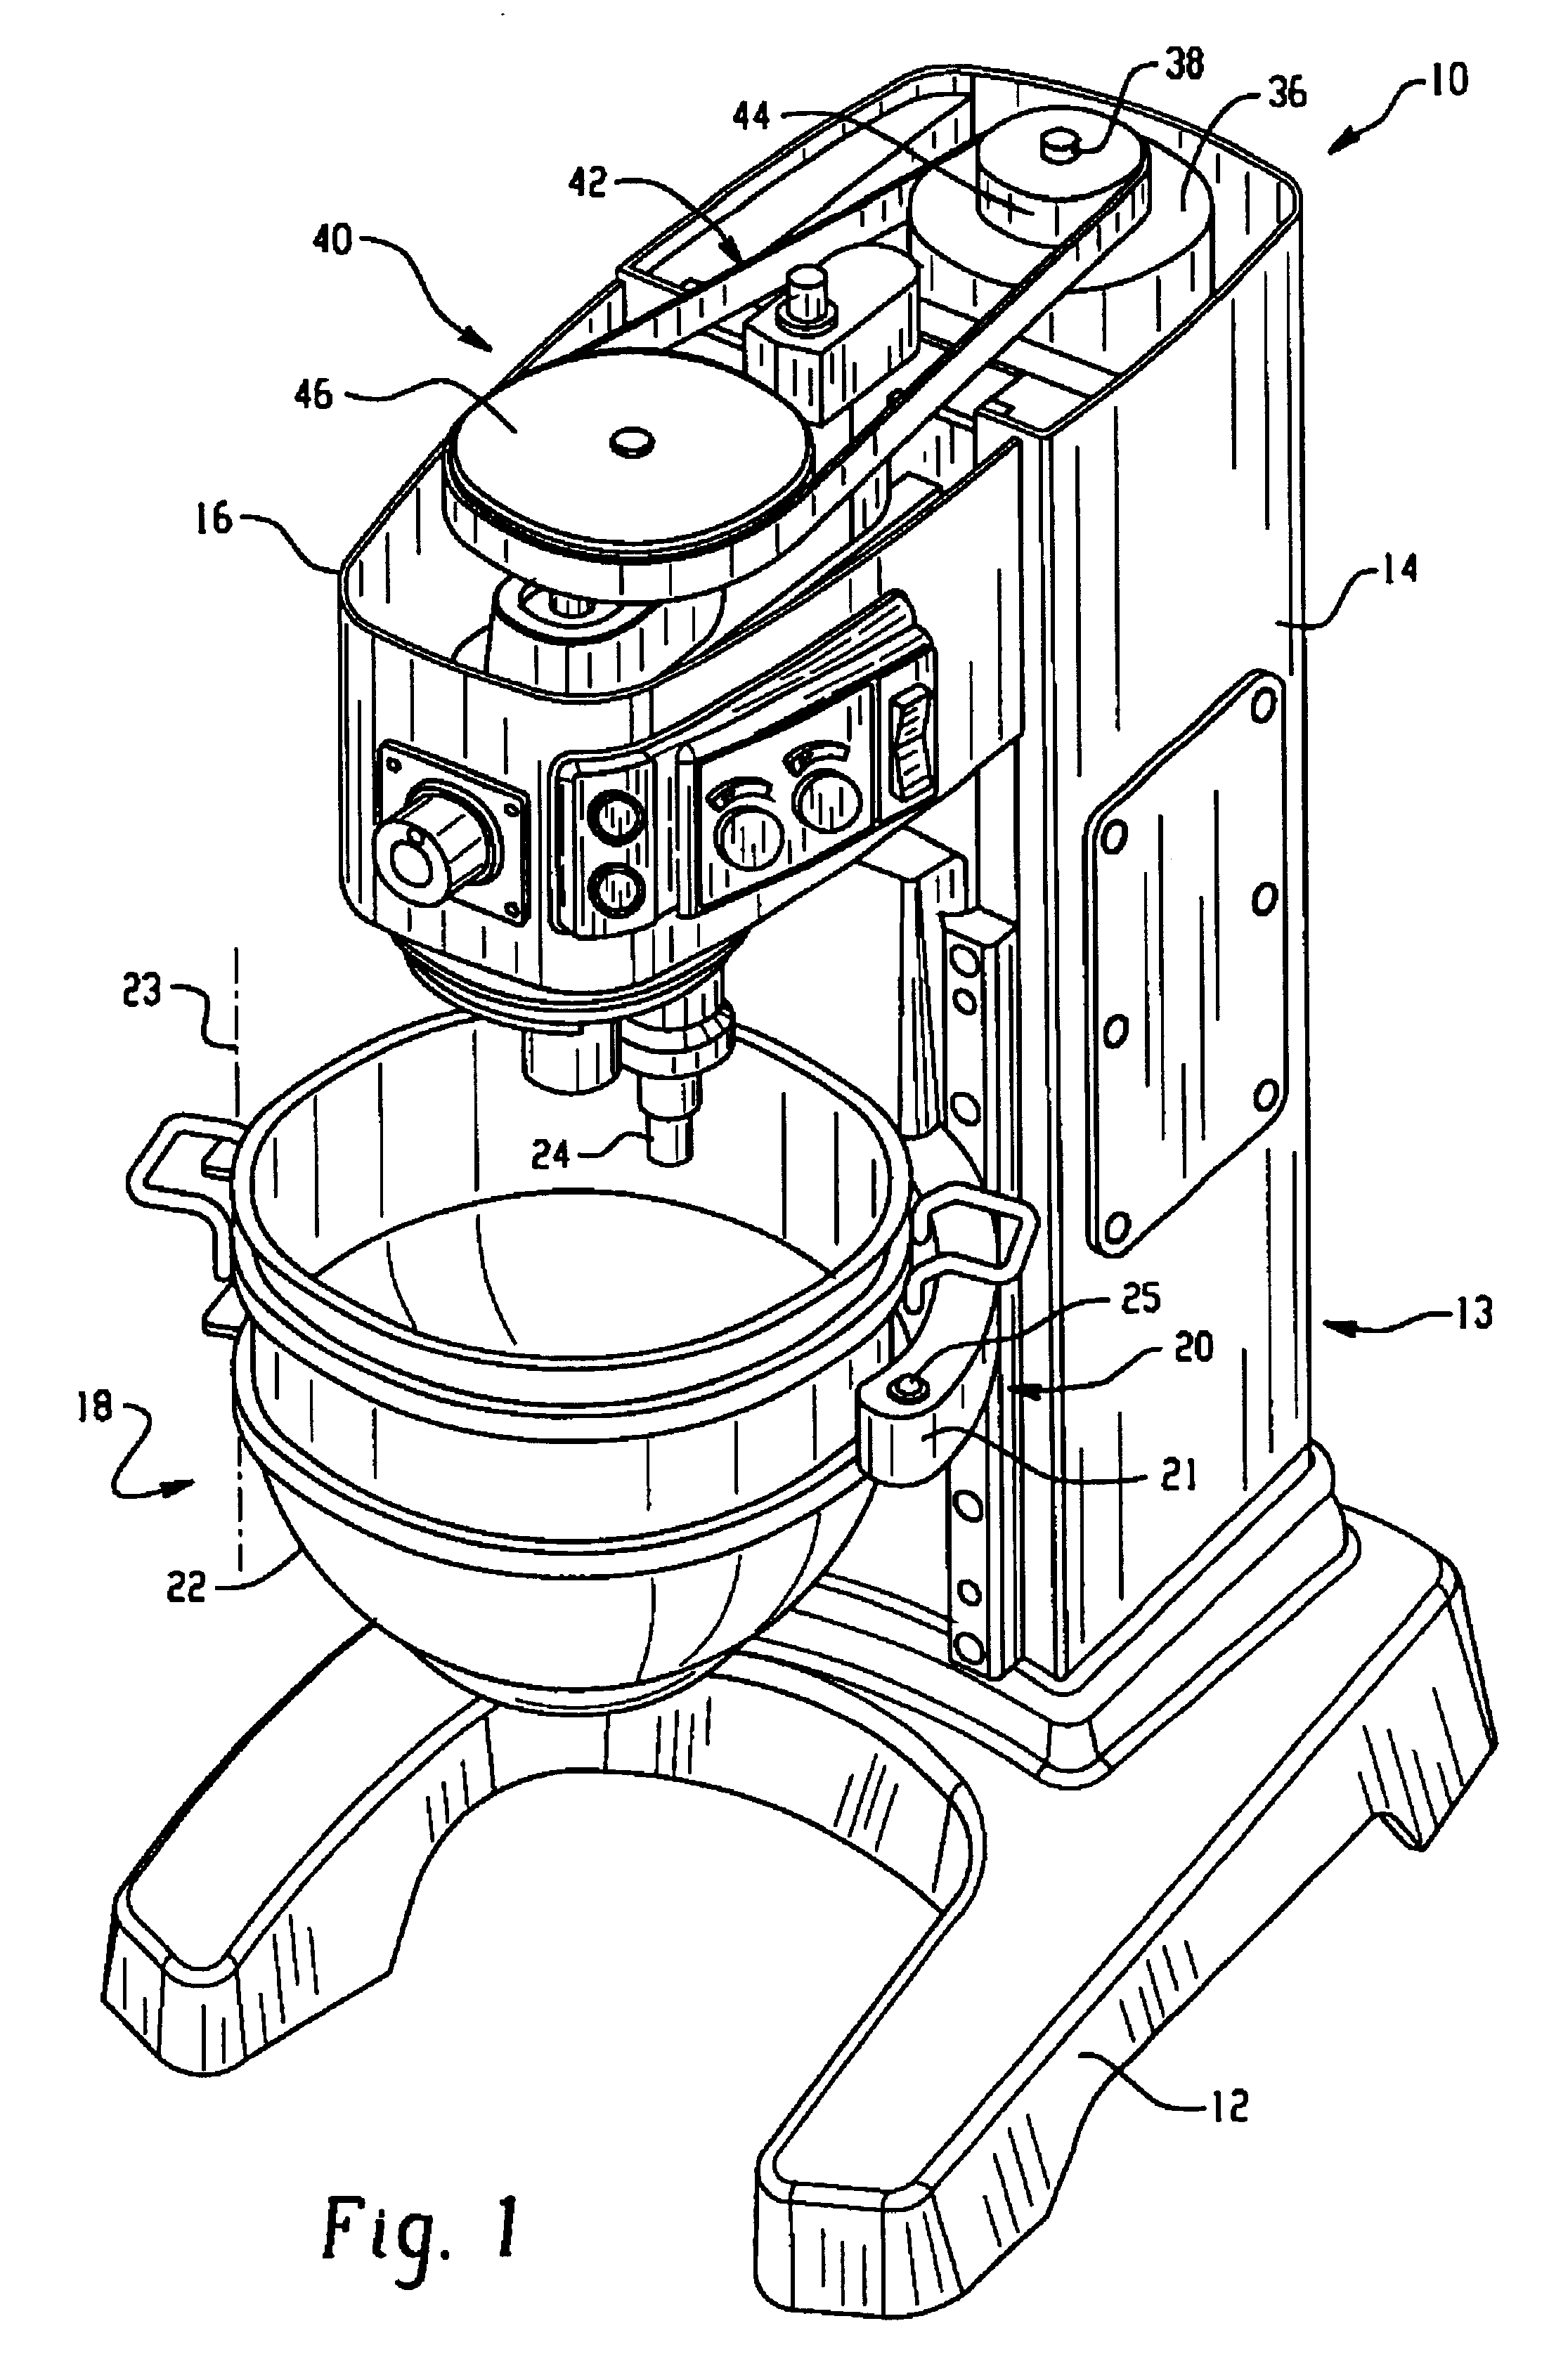 Bowl scraper and related attachment system for mixing machine